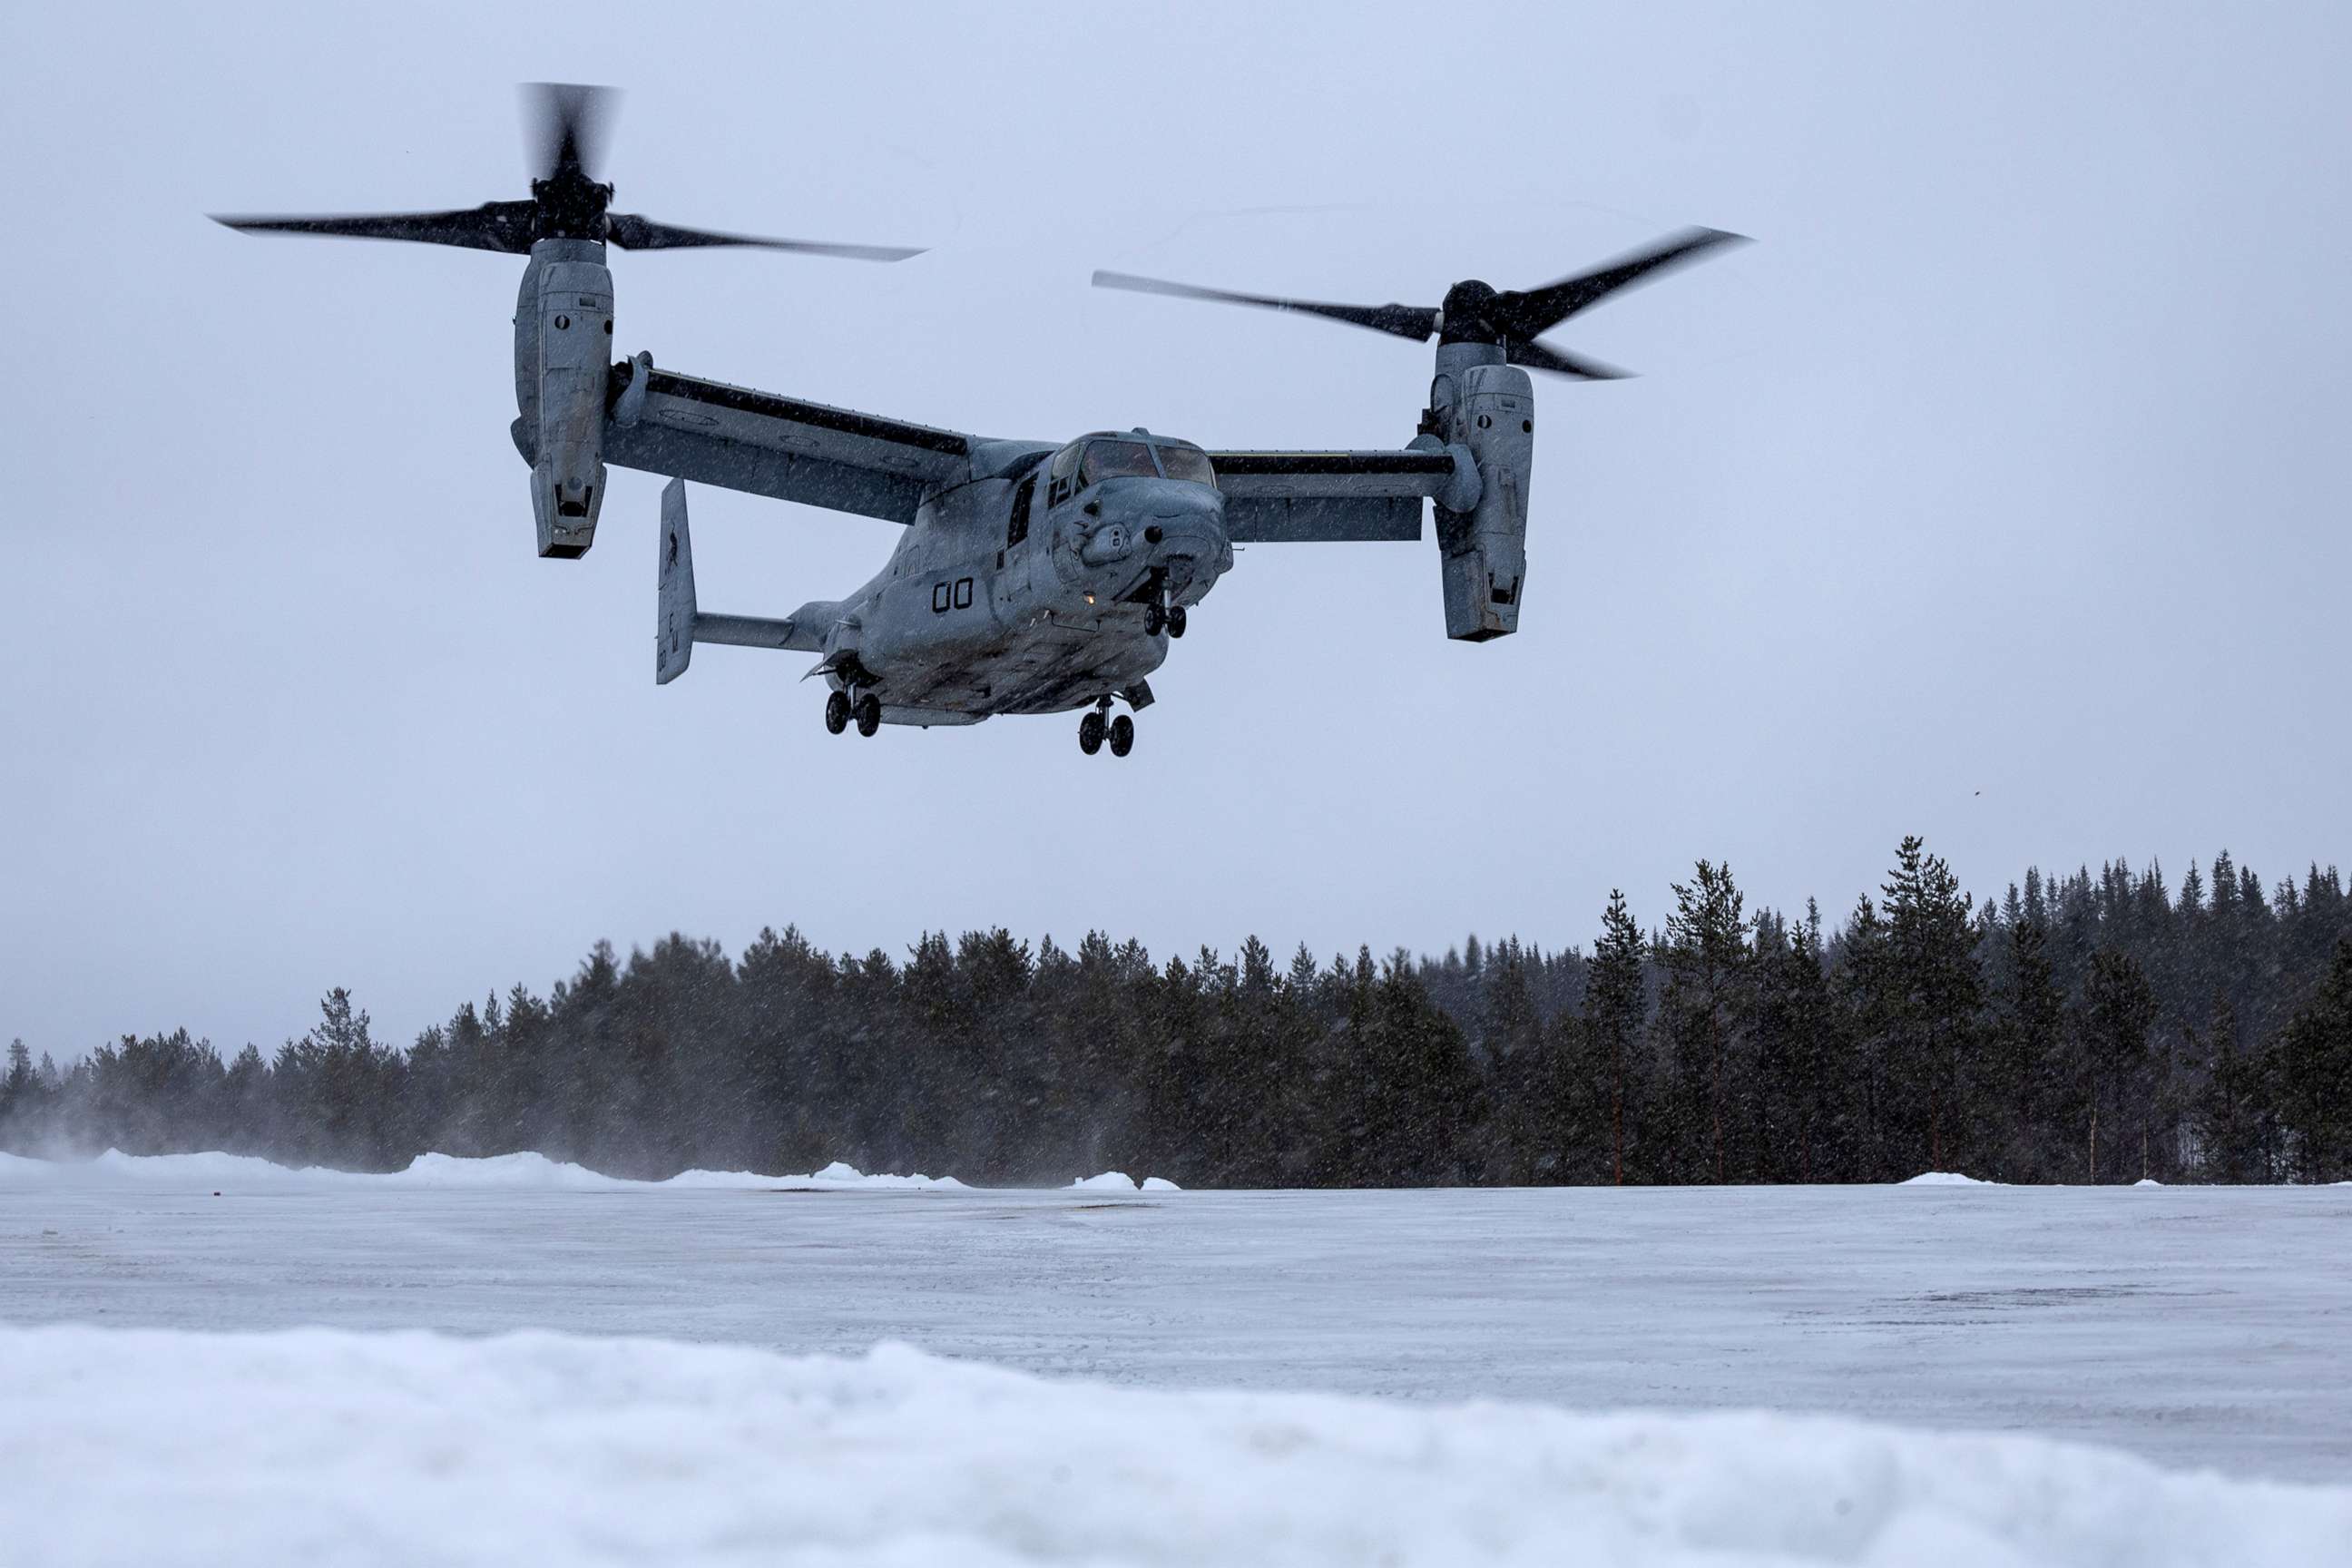 PHOTO: U.S. Marines with 2nd Marine Aircraft Wing, II Marine Expeditionary Force prepare to land in an MV-22B Osprey over the Norwegian Army Base in Setermoen, Norway, March 2, 2022.